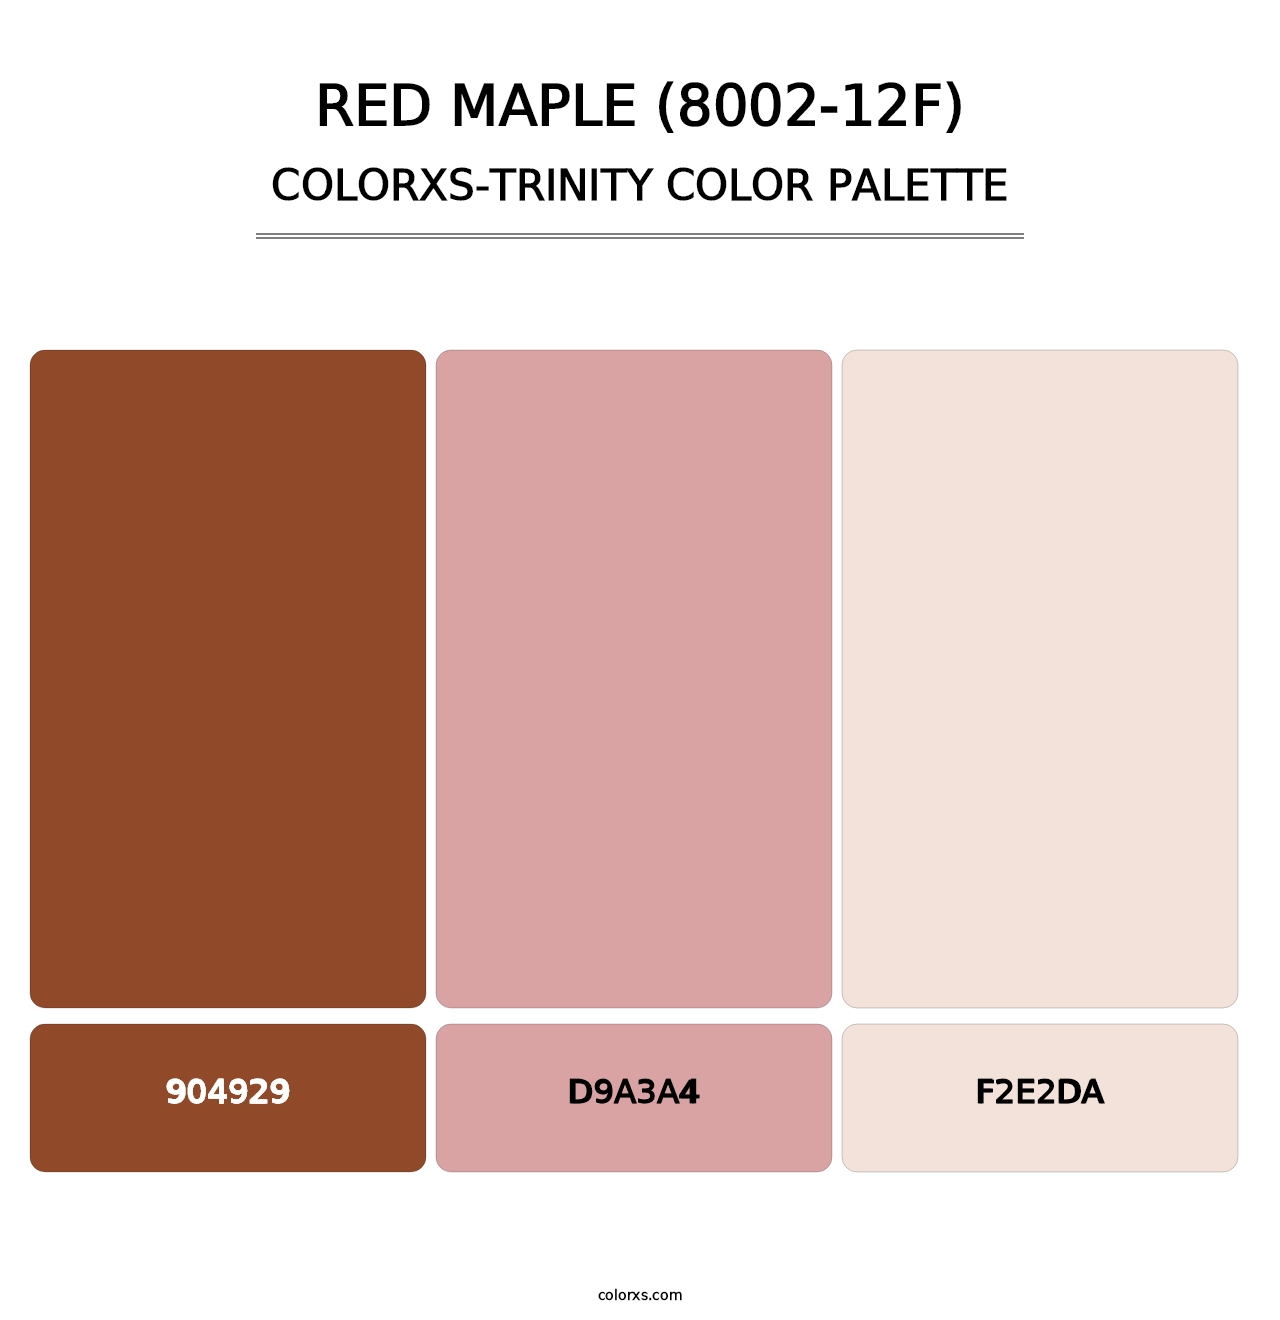 Red Maple (8002-12F) - Colorxs Trinity Palette